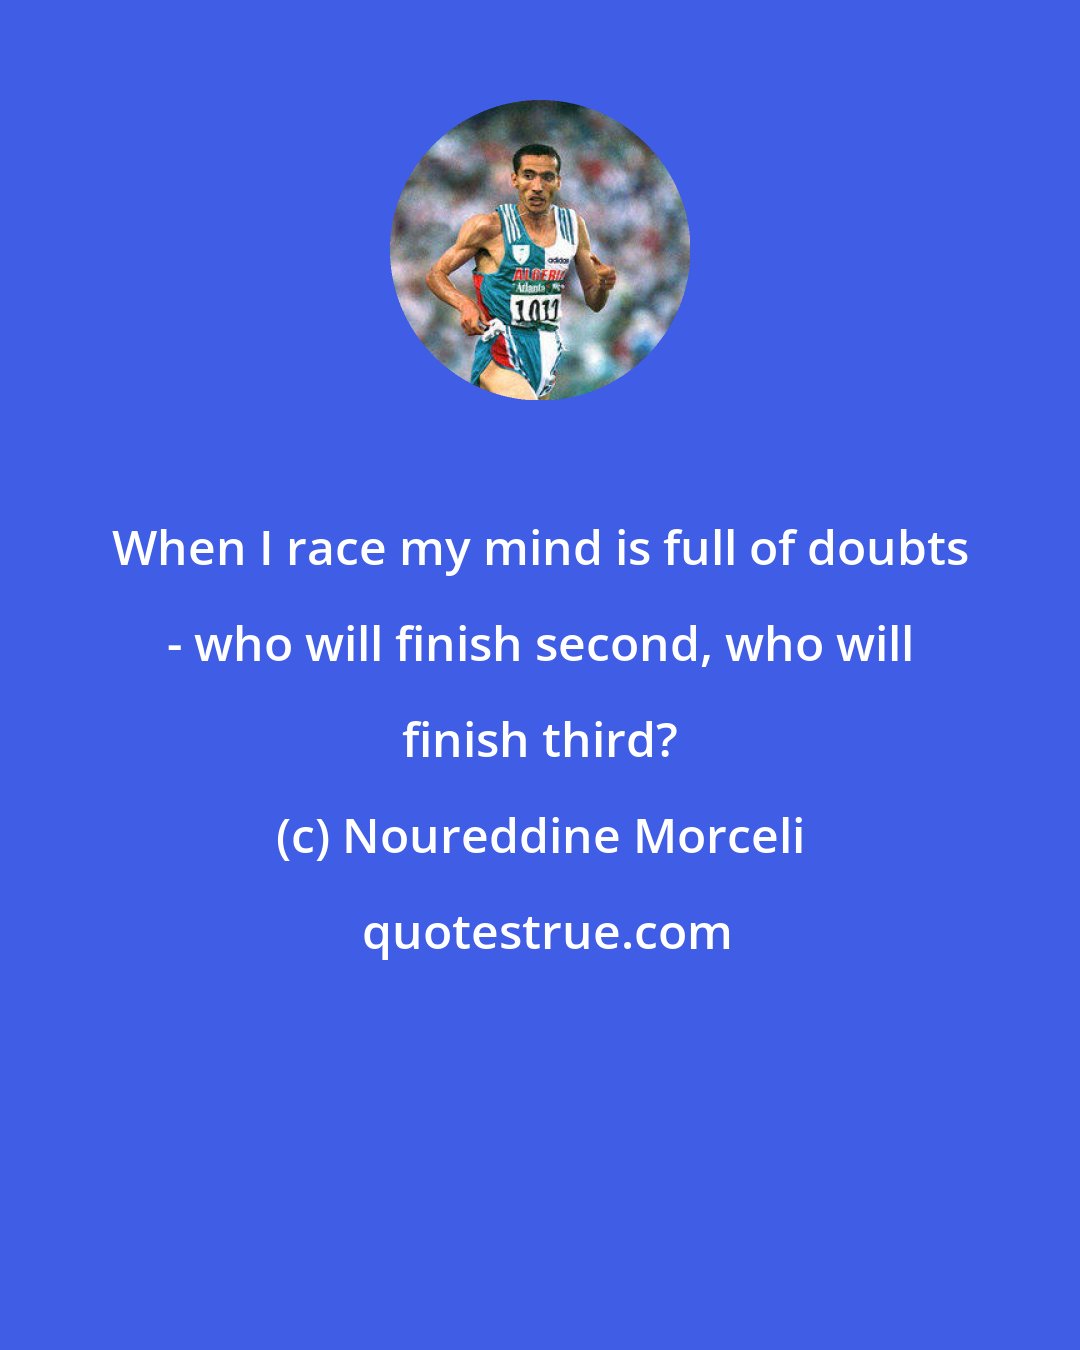 Noureddine Morceli: When I race my mind is full of doubts - who will finish second, who will finish third?